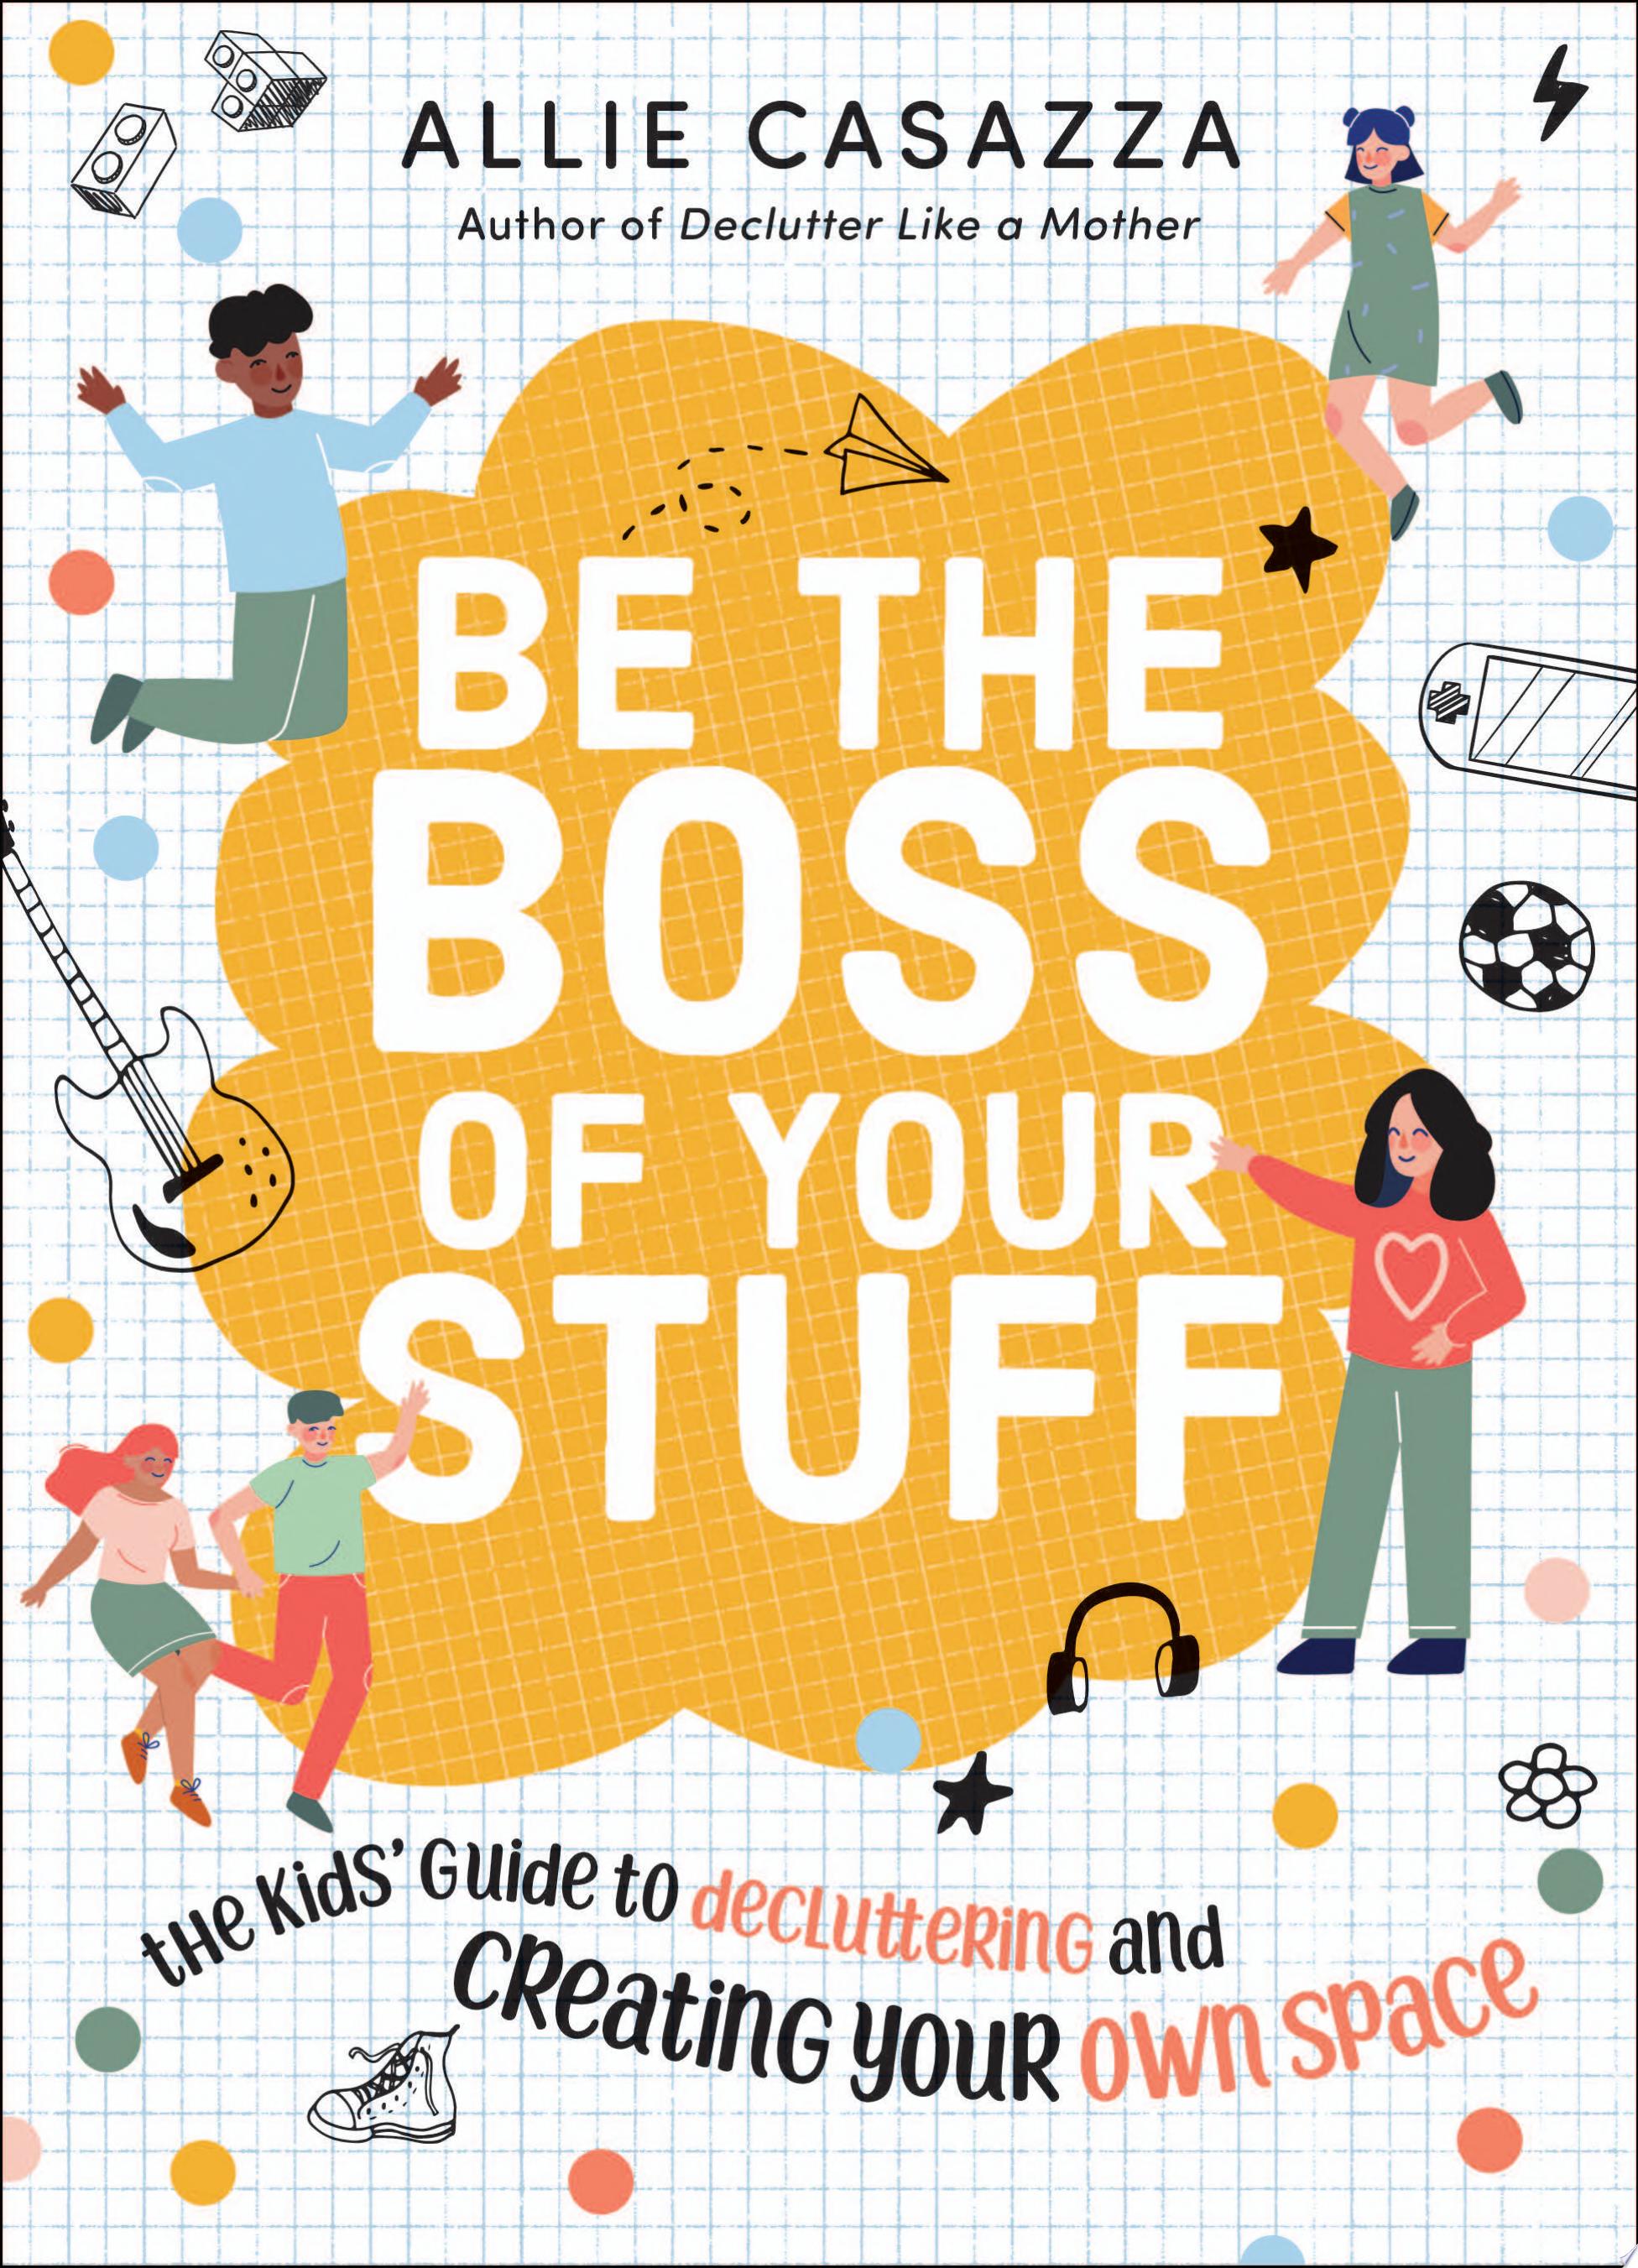 Image for "Be the Boss of Your Stuff"